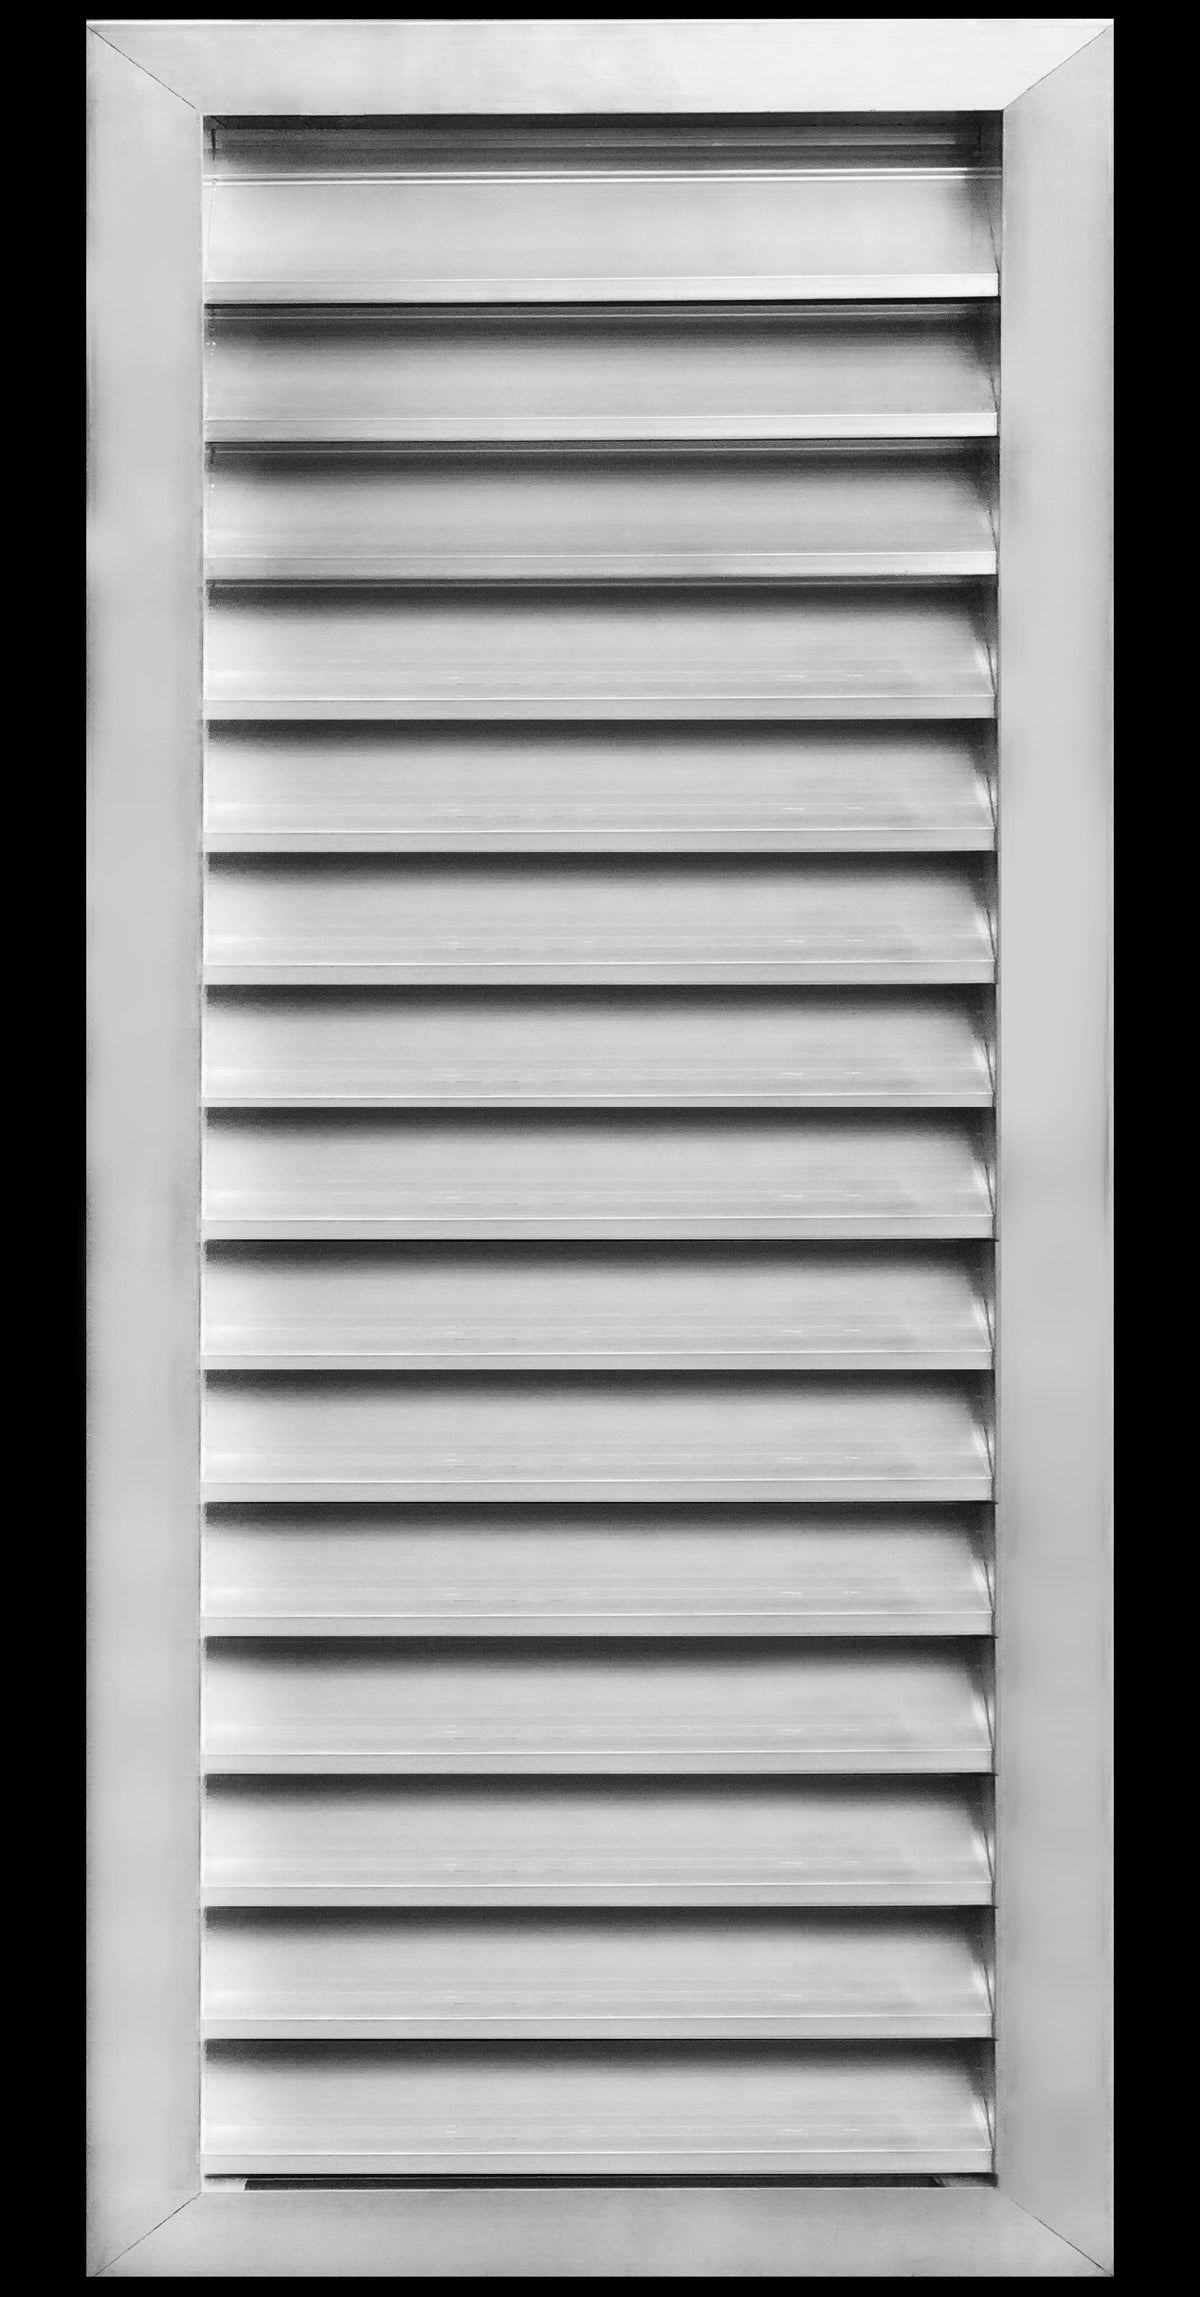 14&quot;w X 34&quot;h Aluminum Outdoor Weather Proof Louvers - Rain &amp; Waterproof Air Vent With Screen Mesh